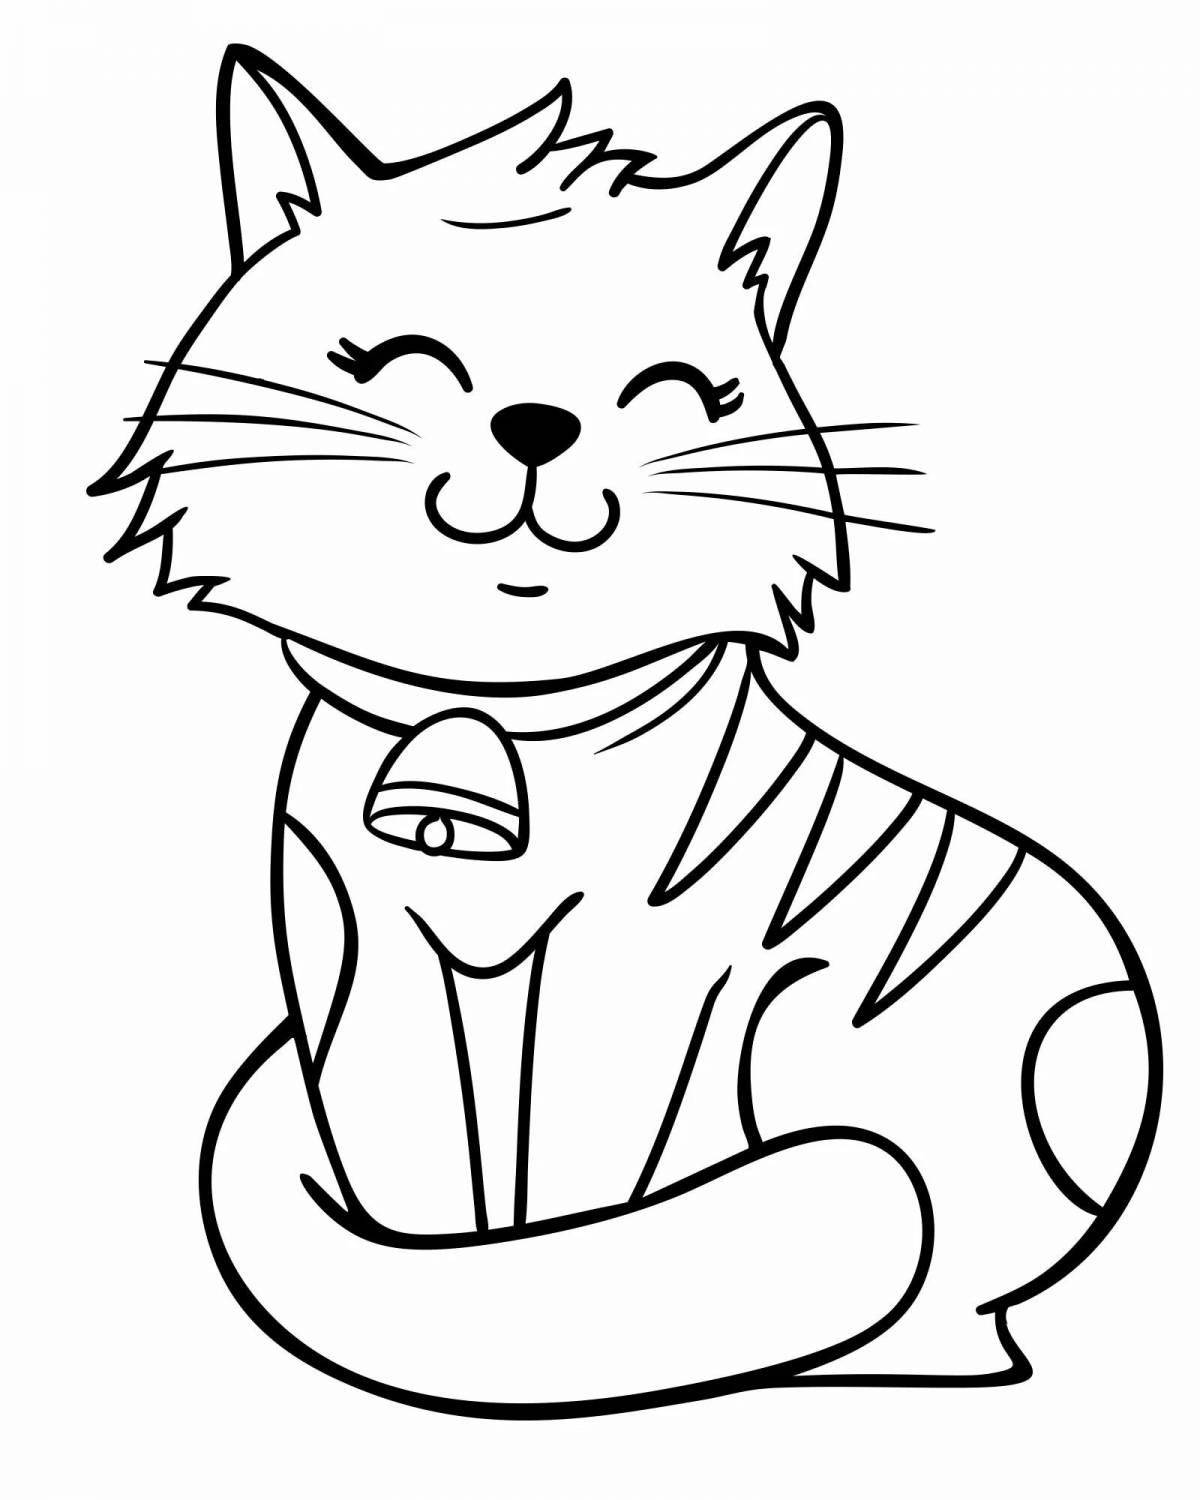 Coloring page festive cat in a hat